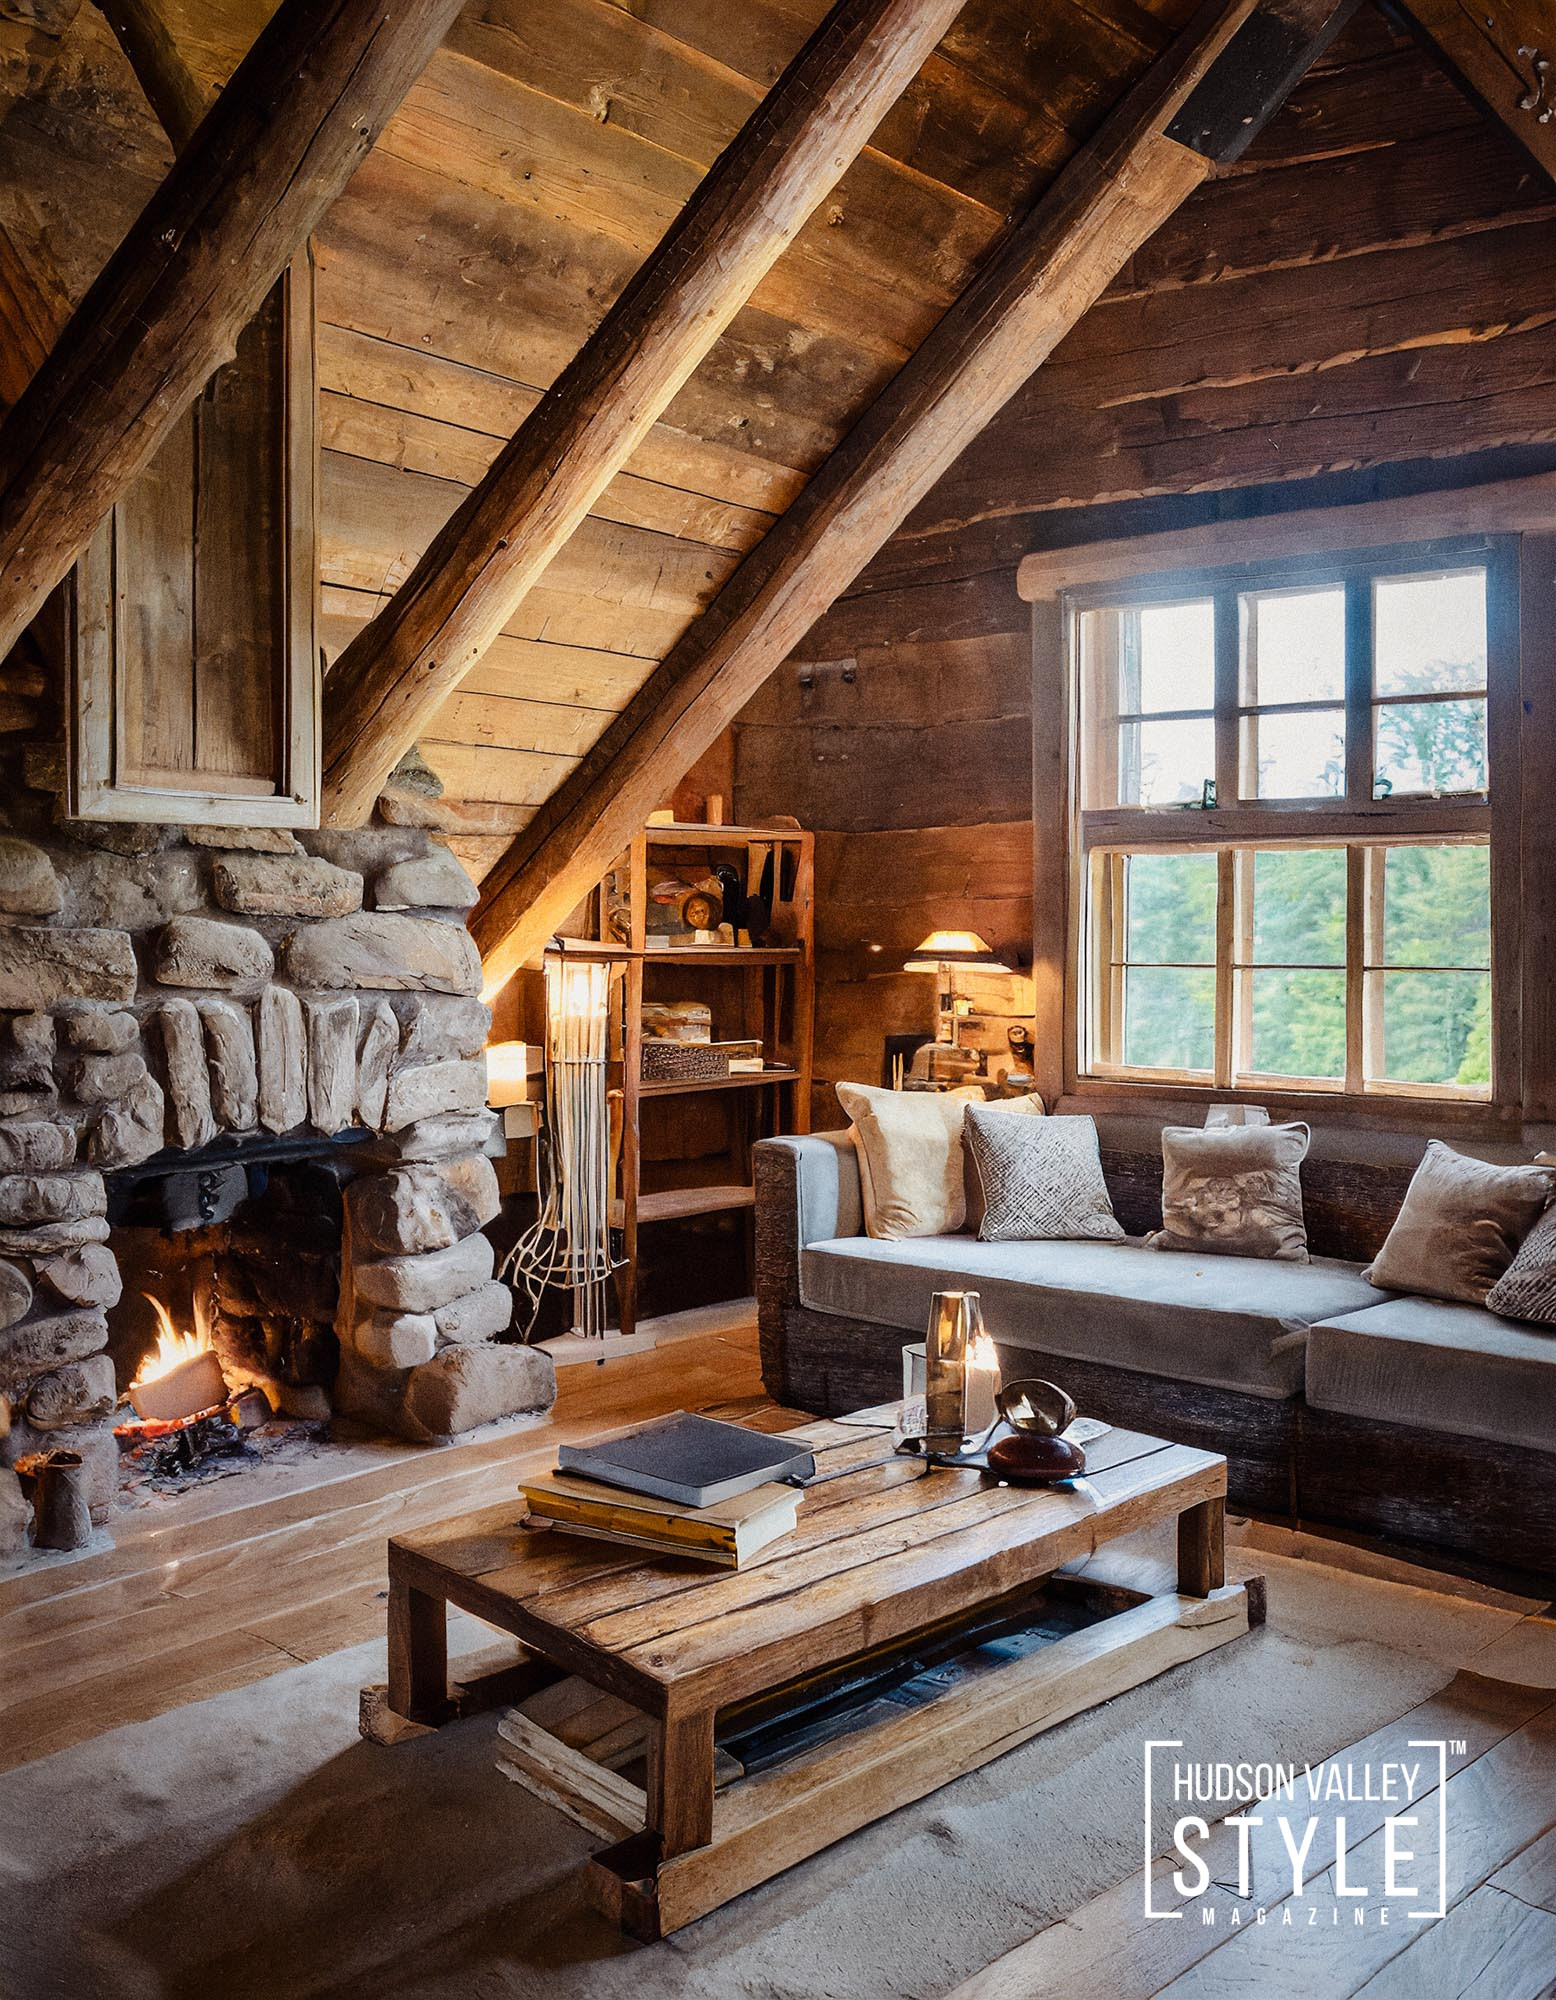 Incorporating Locally-Inspired Interior Design Themes: Decorating Your Hudson Valley & Catskills Airbnb with Authenticity – Experiential Hospitality Design 101 with Maxwell Alexander, MA(FIT), BFA(SVA)